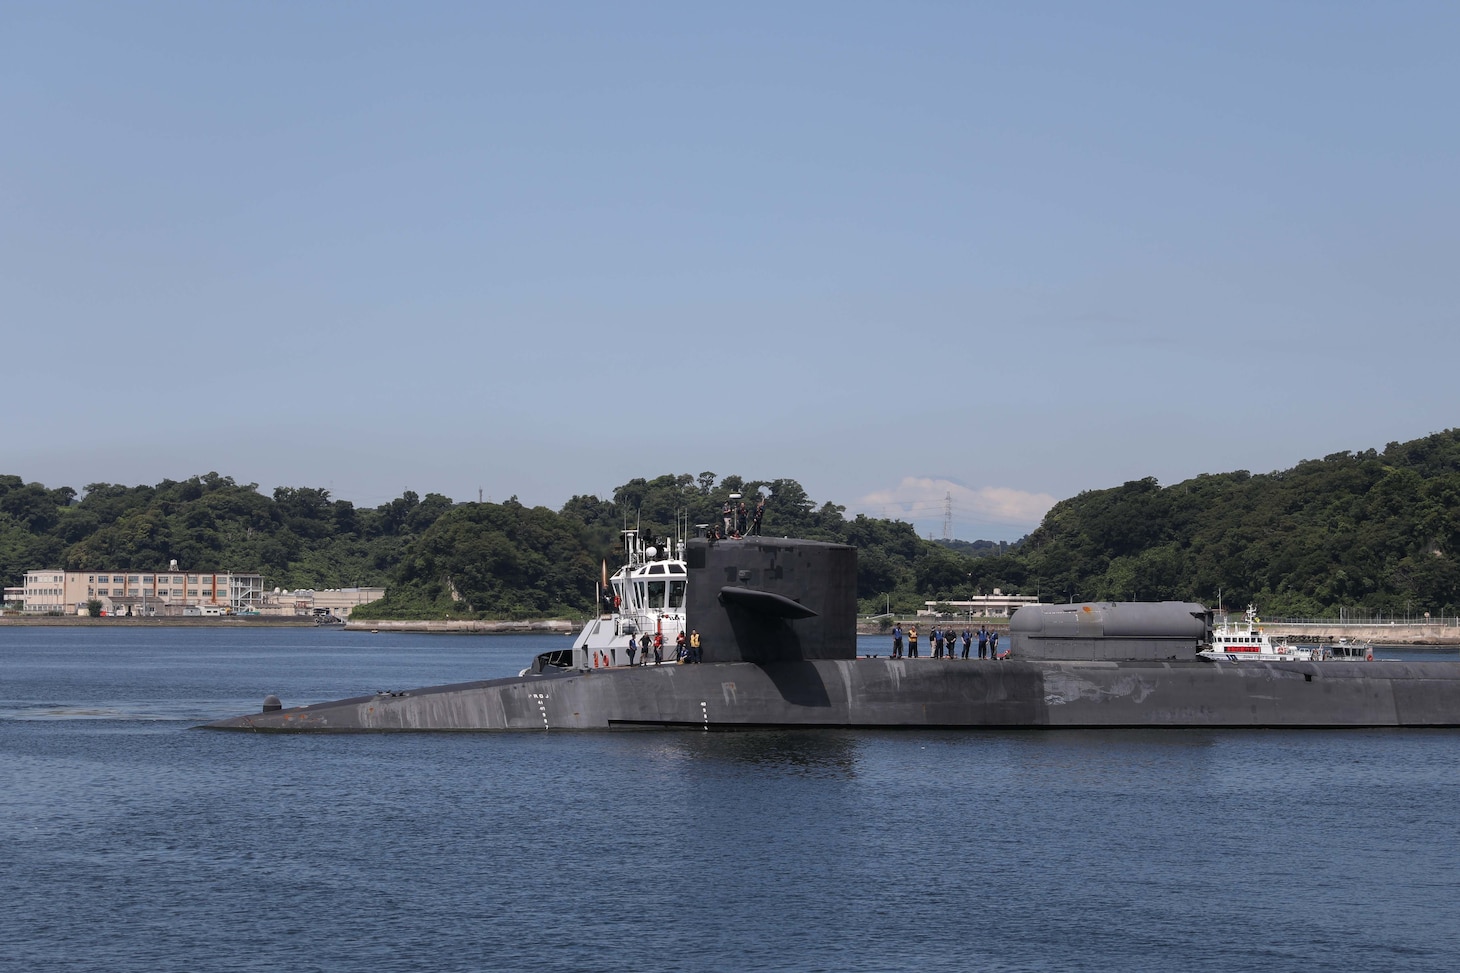 The Ohio-class guided-missile submarine USS Michigan (SSGN 727) arrives in Fleet Activities Yokosuka, July 2, 2023. Homeported in Naval Base Kitsap, Bangor, Washington, Michigan provides strike and special operation mission capabilities from a stealthy, clandestine platform.